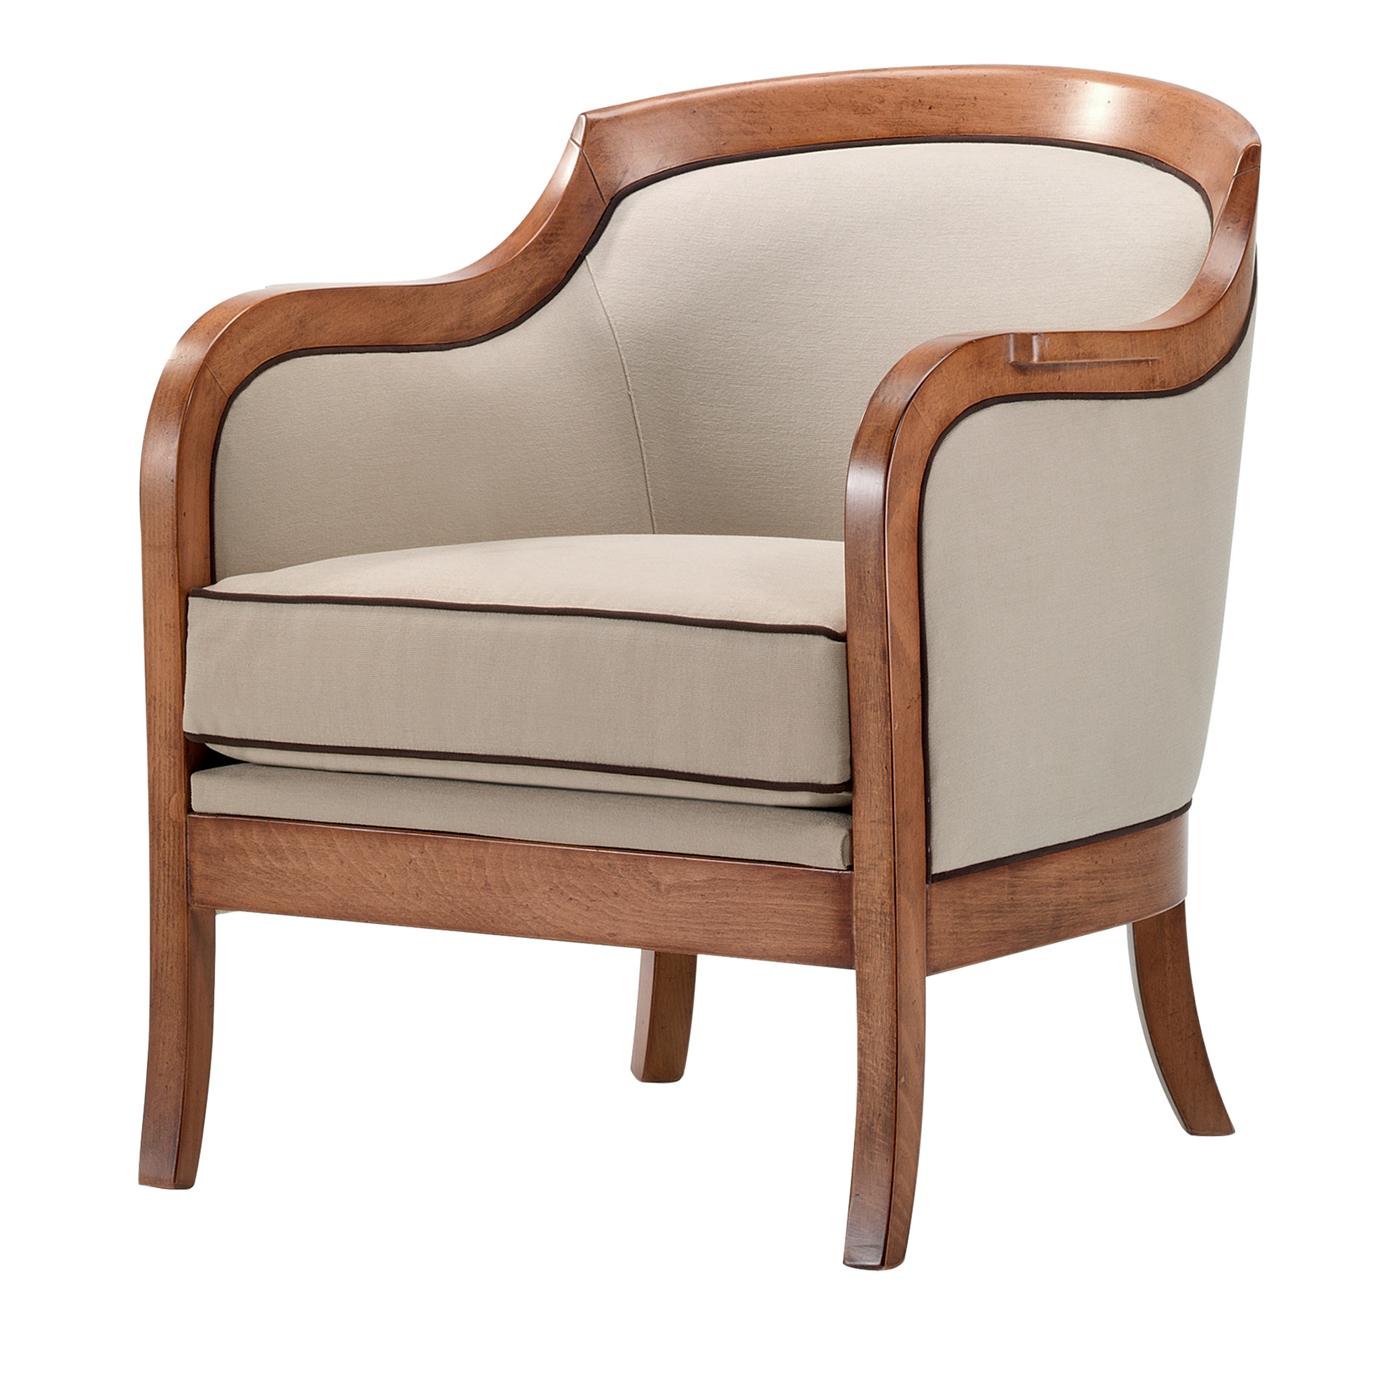 This charming armchair combines classic and contemporary design for a luxurious and timeless style. The piece shown here has a wooden structure and a upholstery in pastel colors, with a comfortable seat cushion. The armchair can be personalized